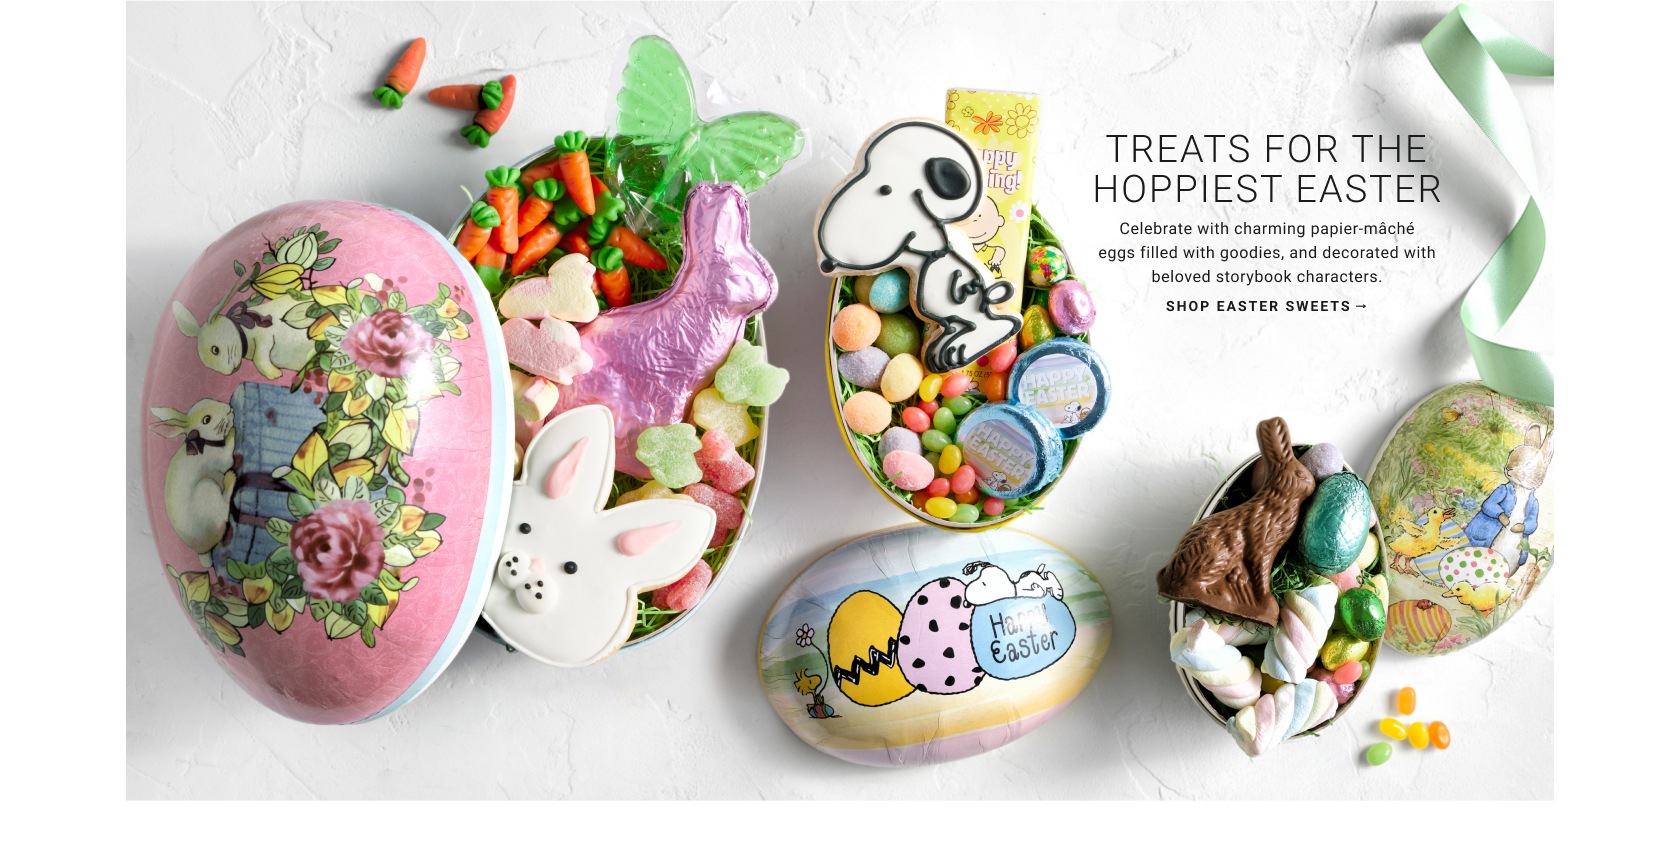 Shop Easter Sweets